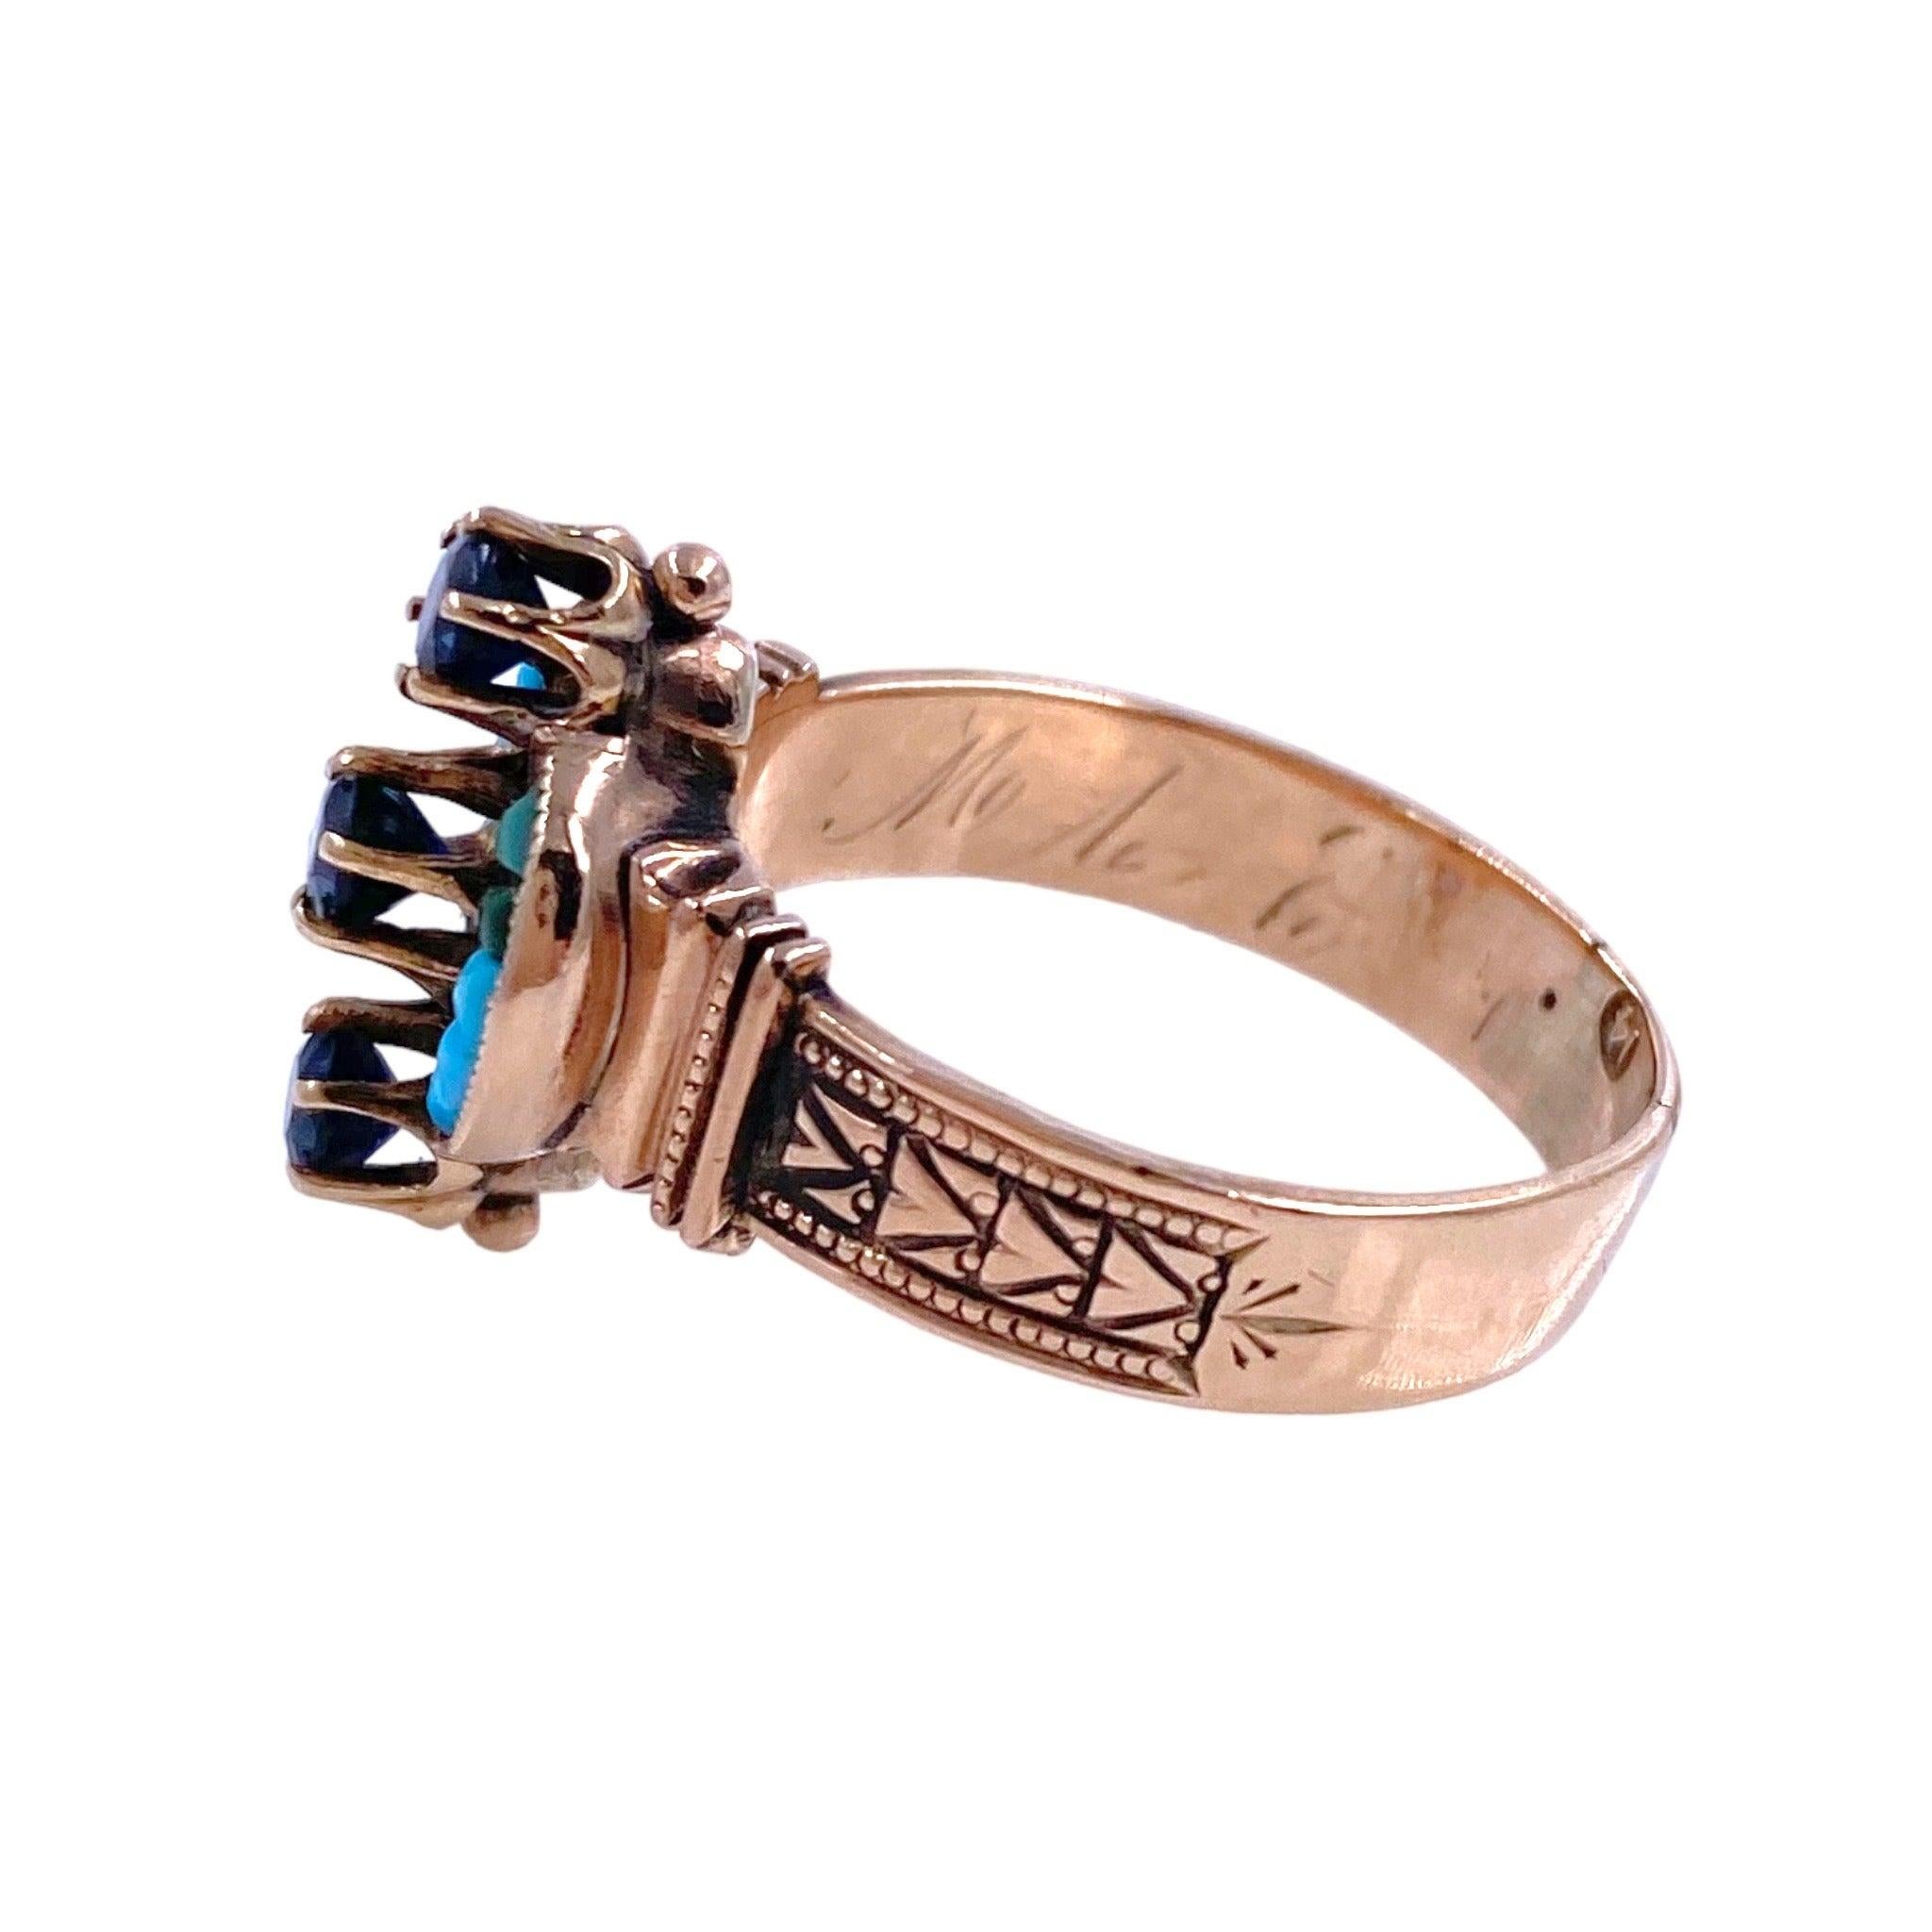 14K rose gold Victorian ring believed to be American made circa 1890's. The ring features three prong set round sapphires and calibre cut, slightly mismatched color turquoise. The shoulders are hand engraved. Part of the original date and message